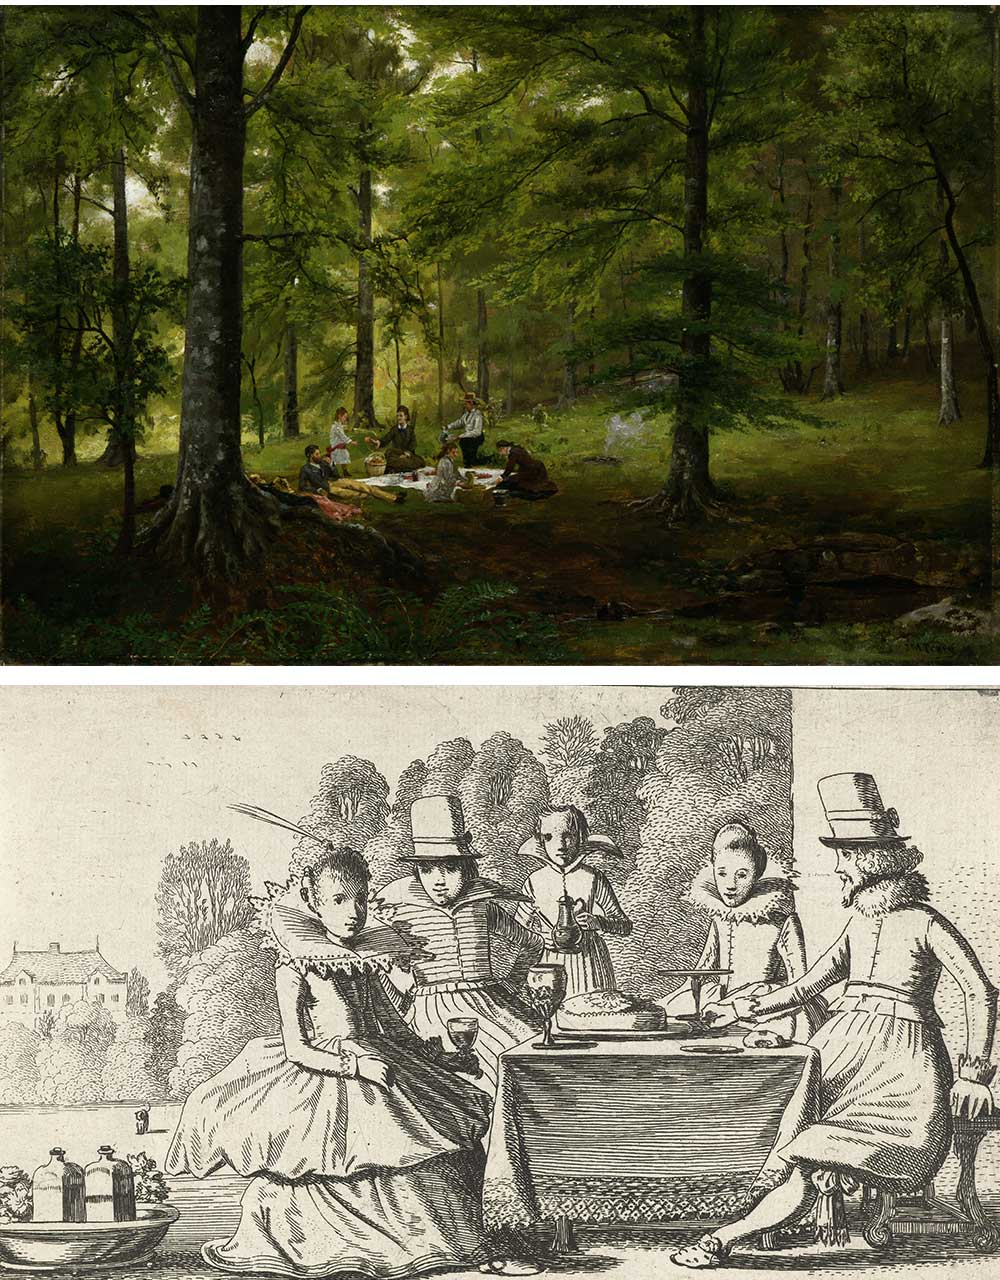 Top: Untitled—Picnic Scene, by J.M. Tracy, c. 1870. Bottom: Two couples at a table in the garden, after Esaias van de Velde, c. 1600.